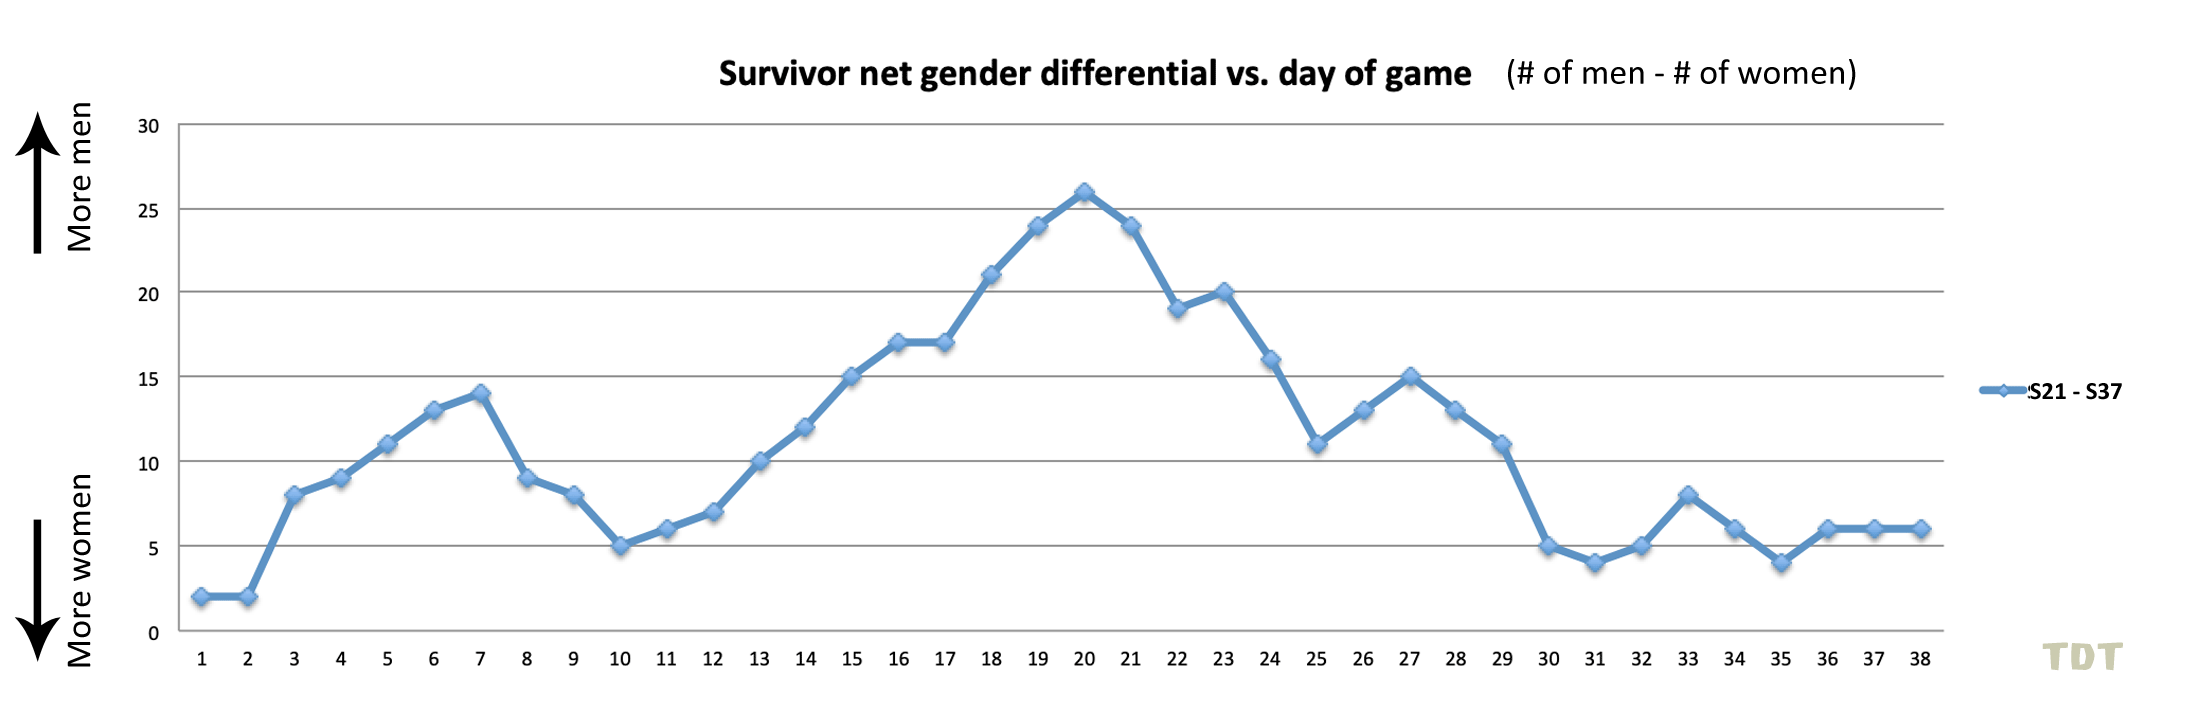 Cumulative gender differential by day of game, S21-S37